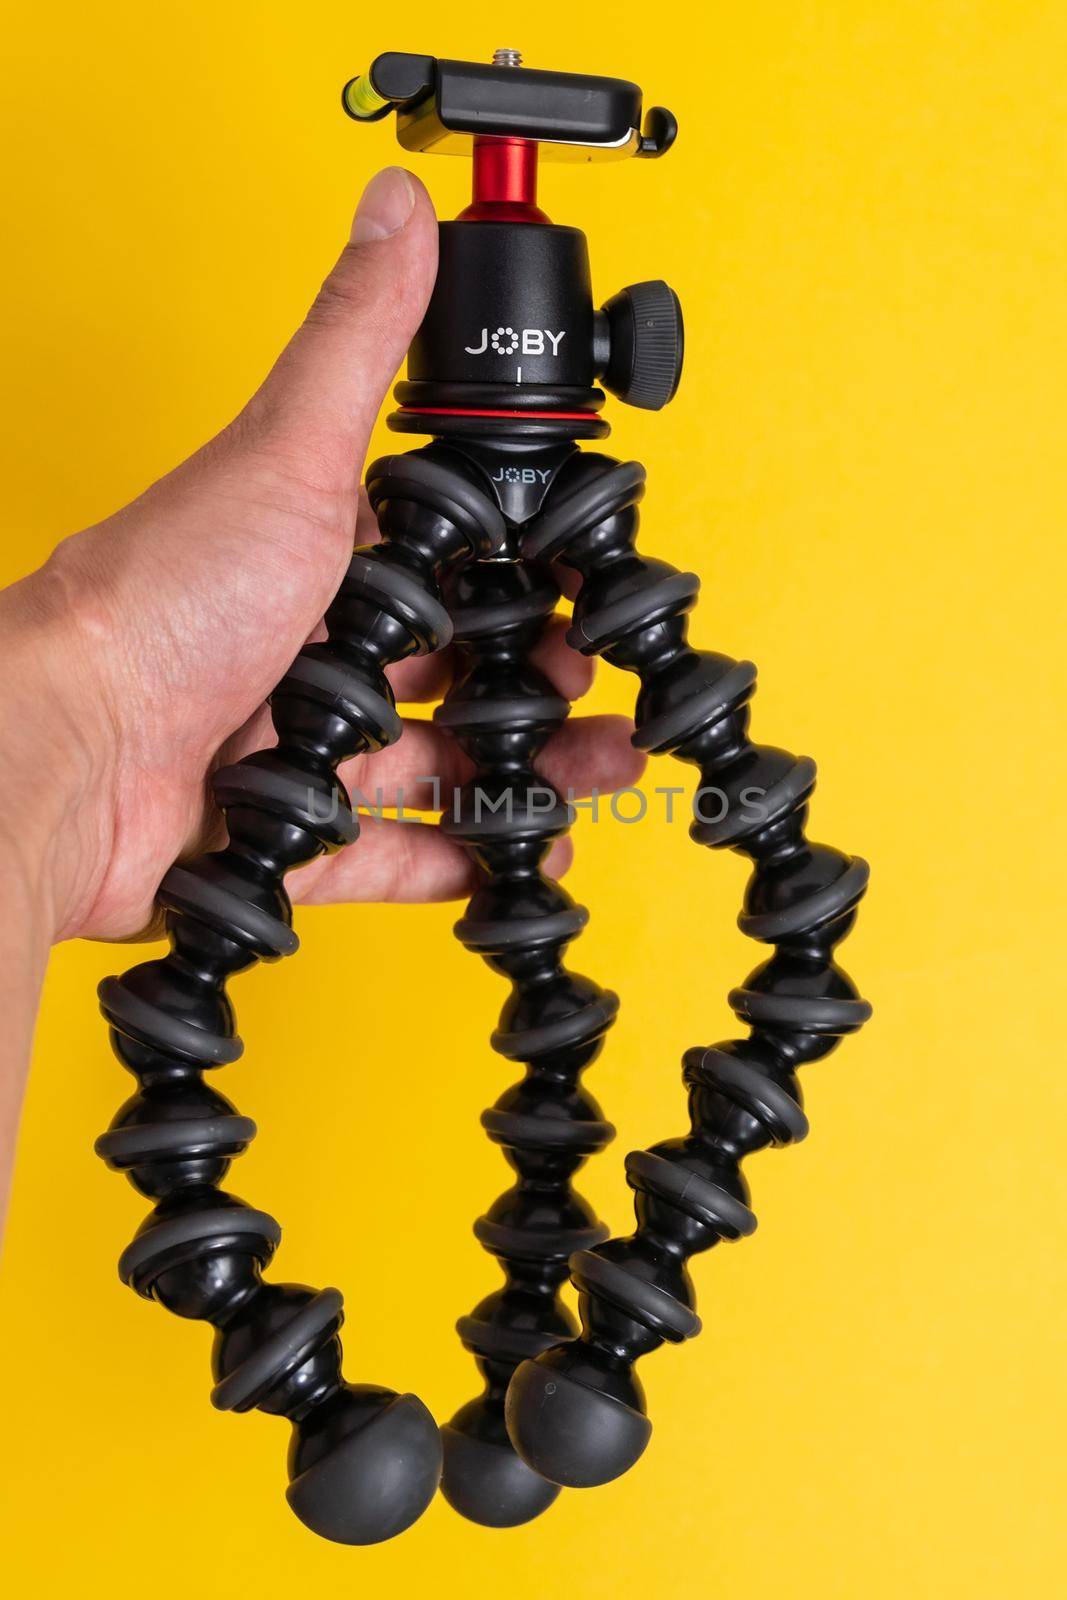 Tyumen, Russia-June 21, 2021: A joby tripod on a yellow background. Selective focus by darksoul72